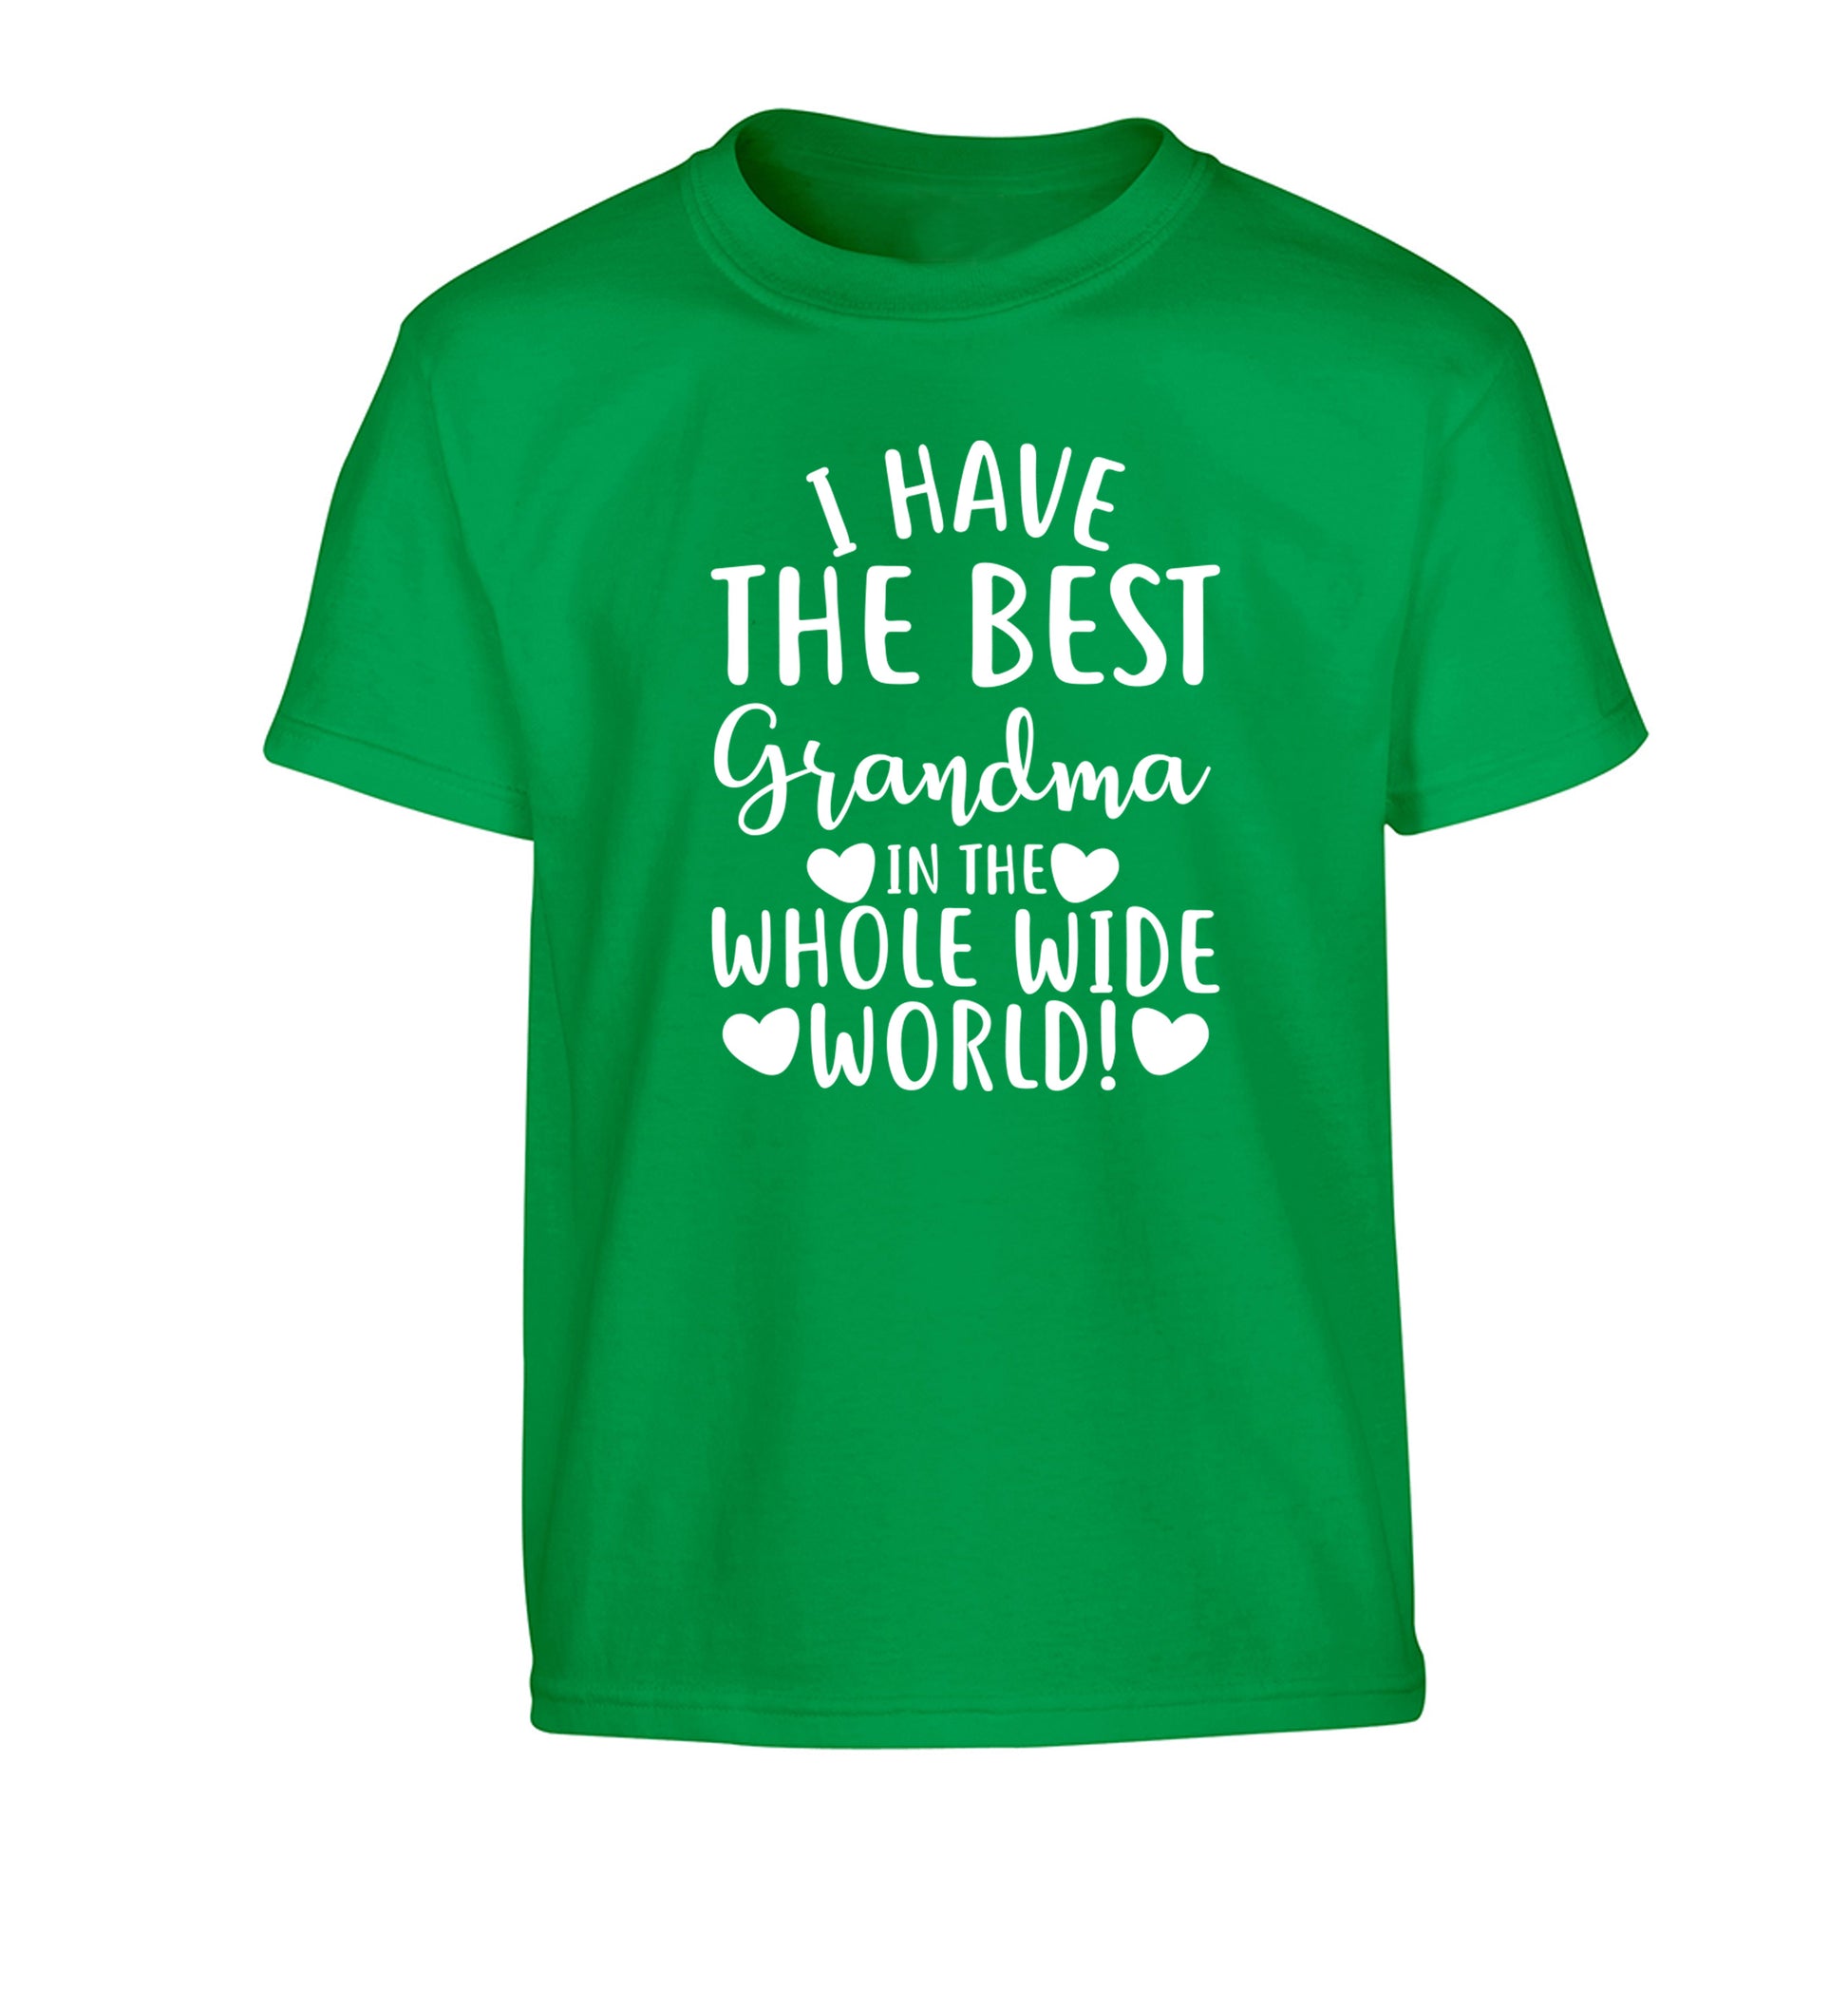 I have the best grandma in the whole wide world! Children's green Tshirt 12-13 Years